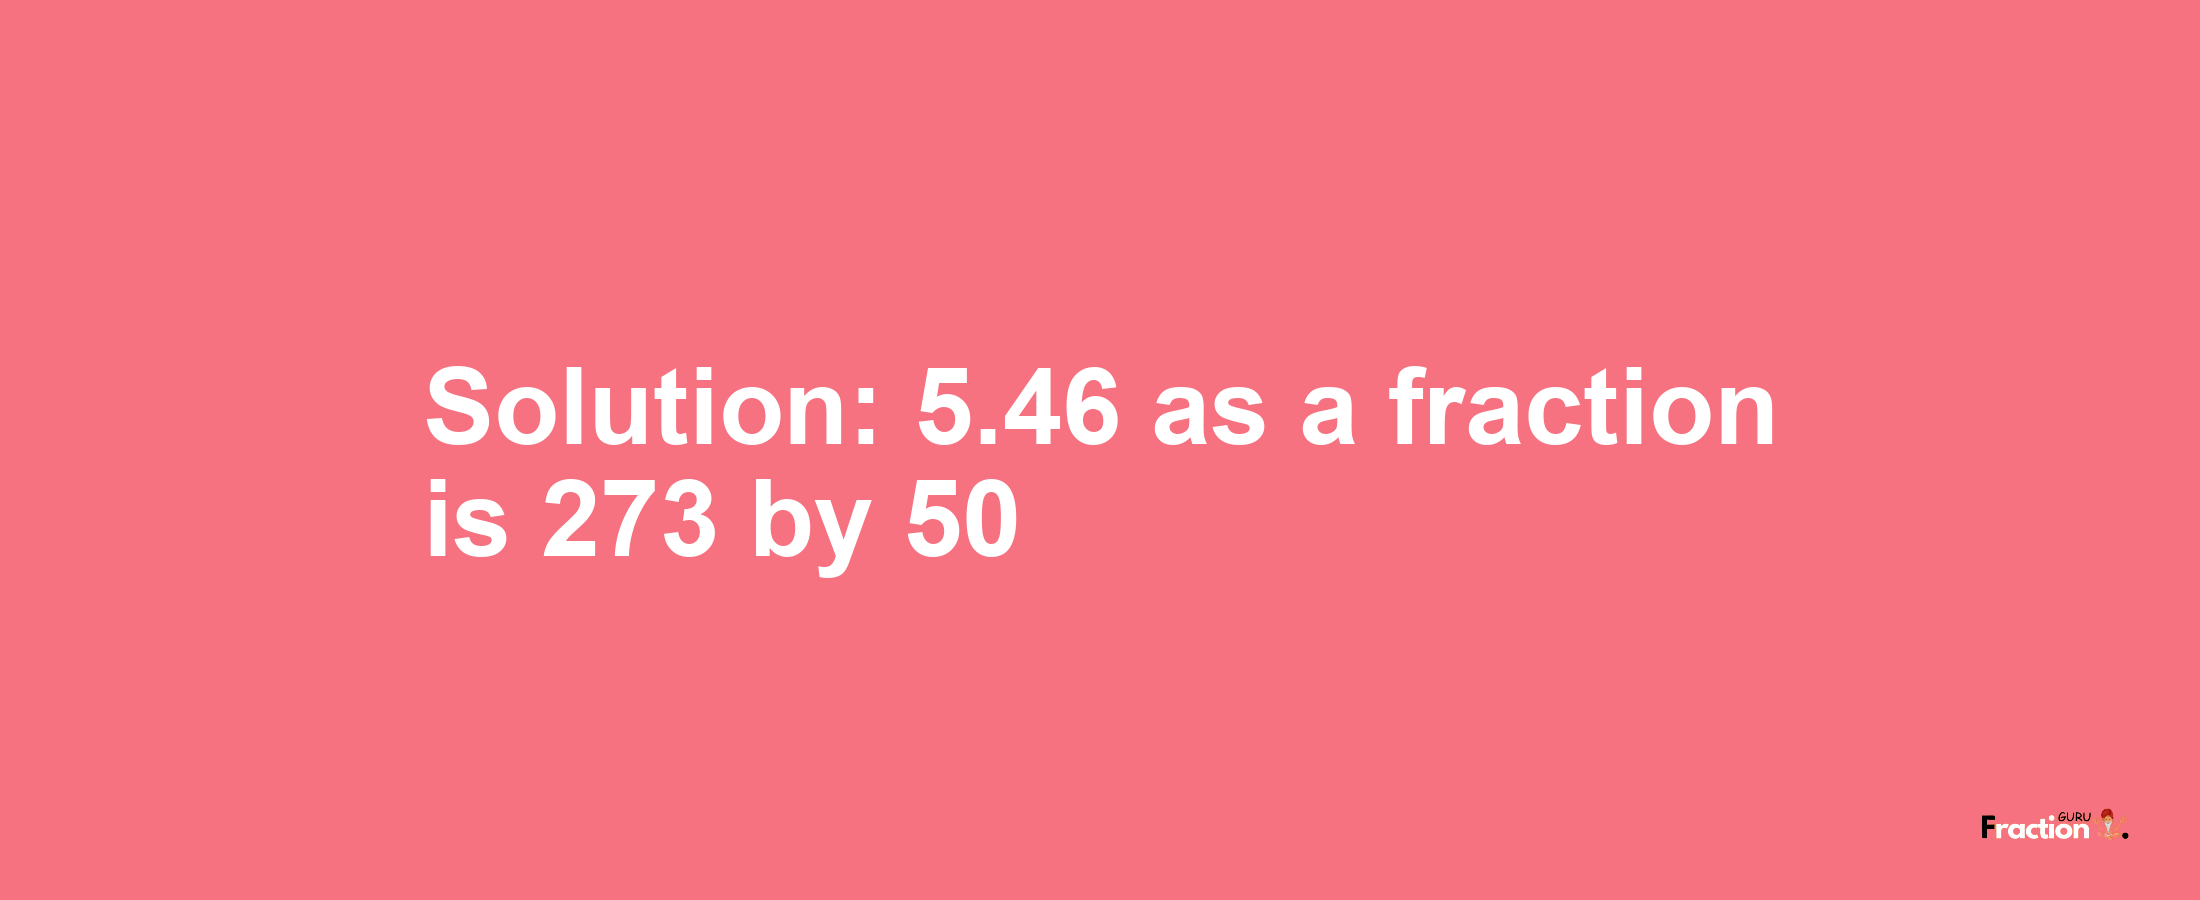 Solution:5.46 as a fraction is 273/50